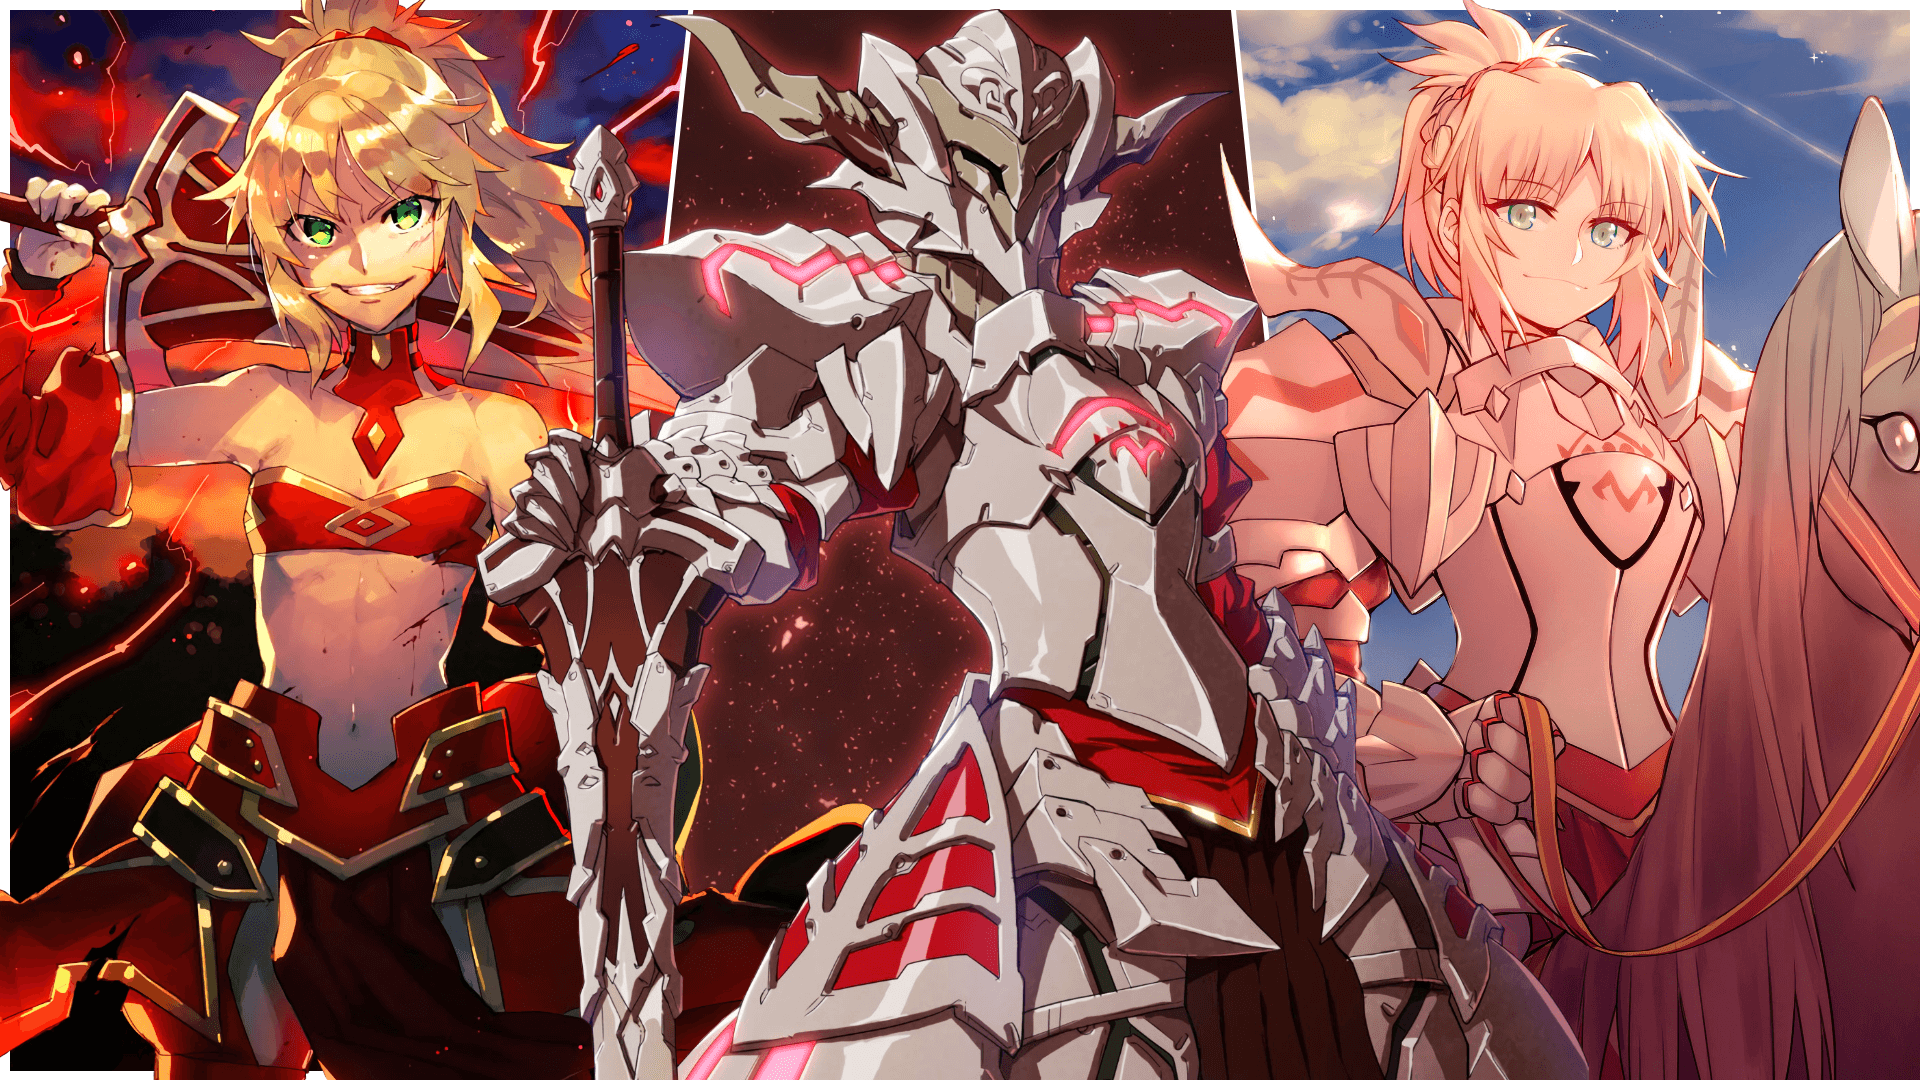 Some Fate Grand Order Wallpaper that I've made